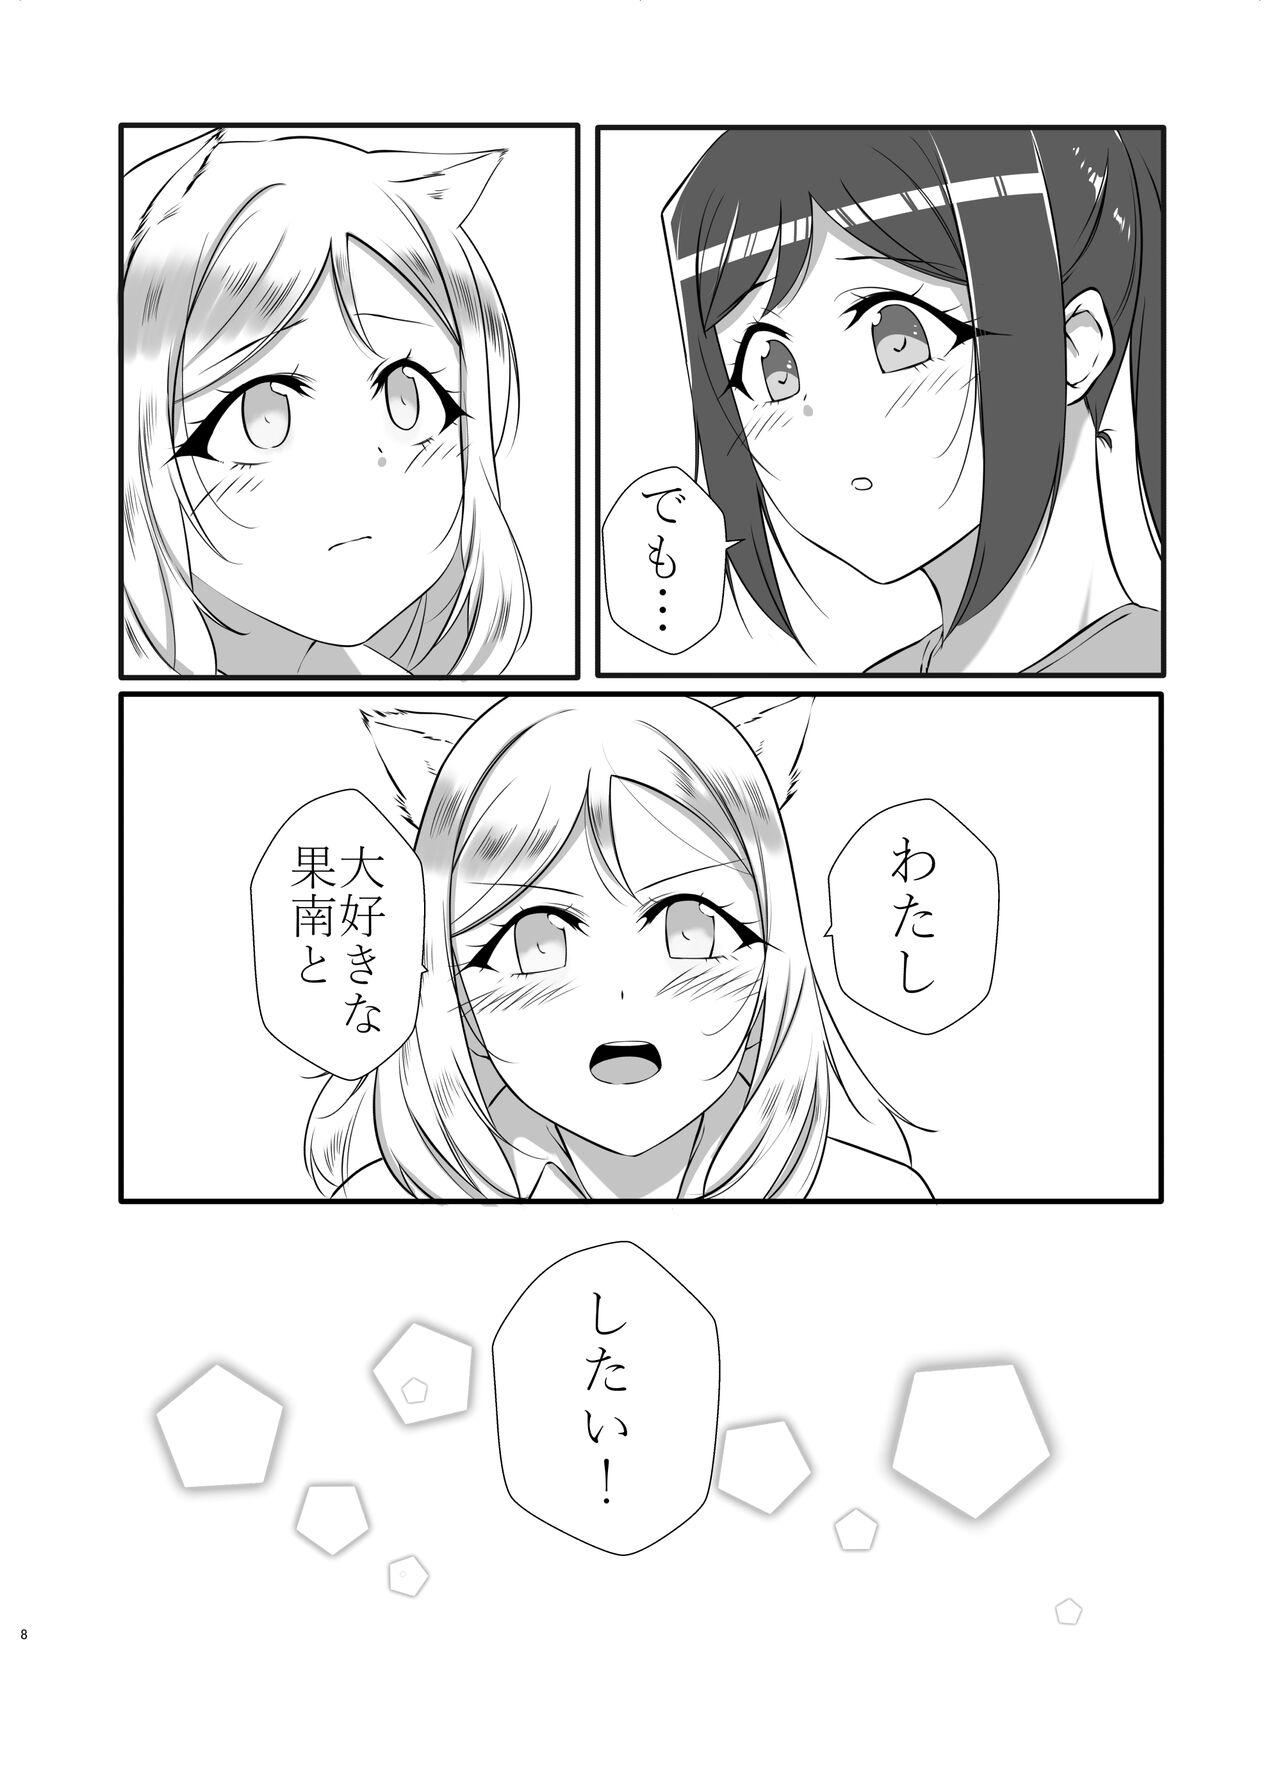 Bokep D.O.G ep. ZERO + D.O.G side.KANAN - Love live sunshine Gay Party - Page 5